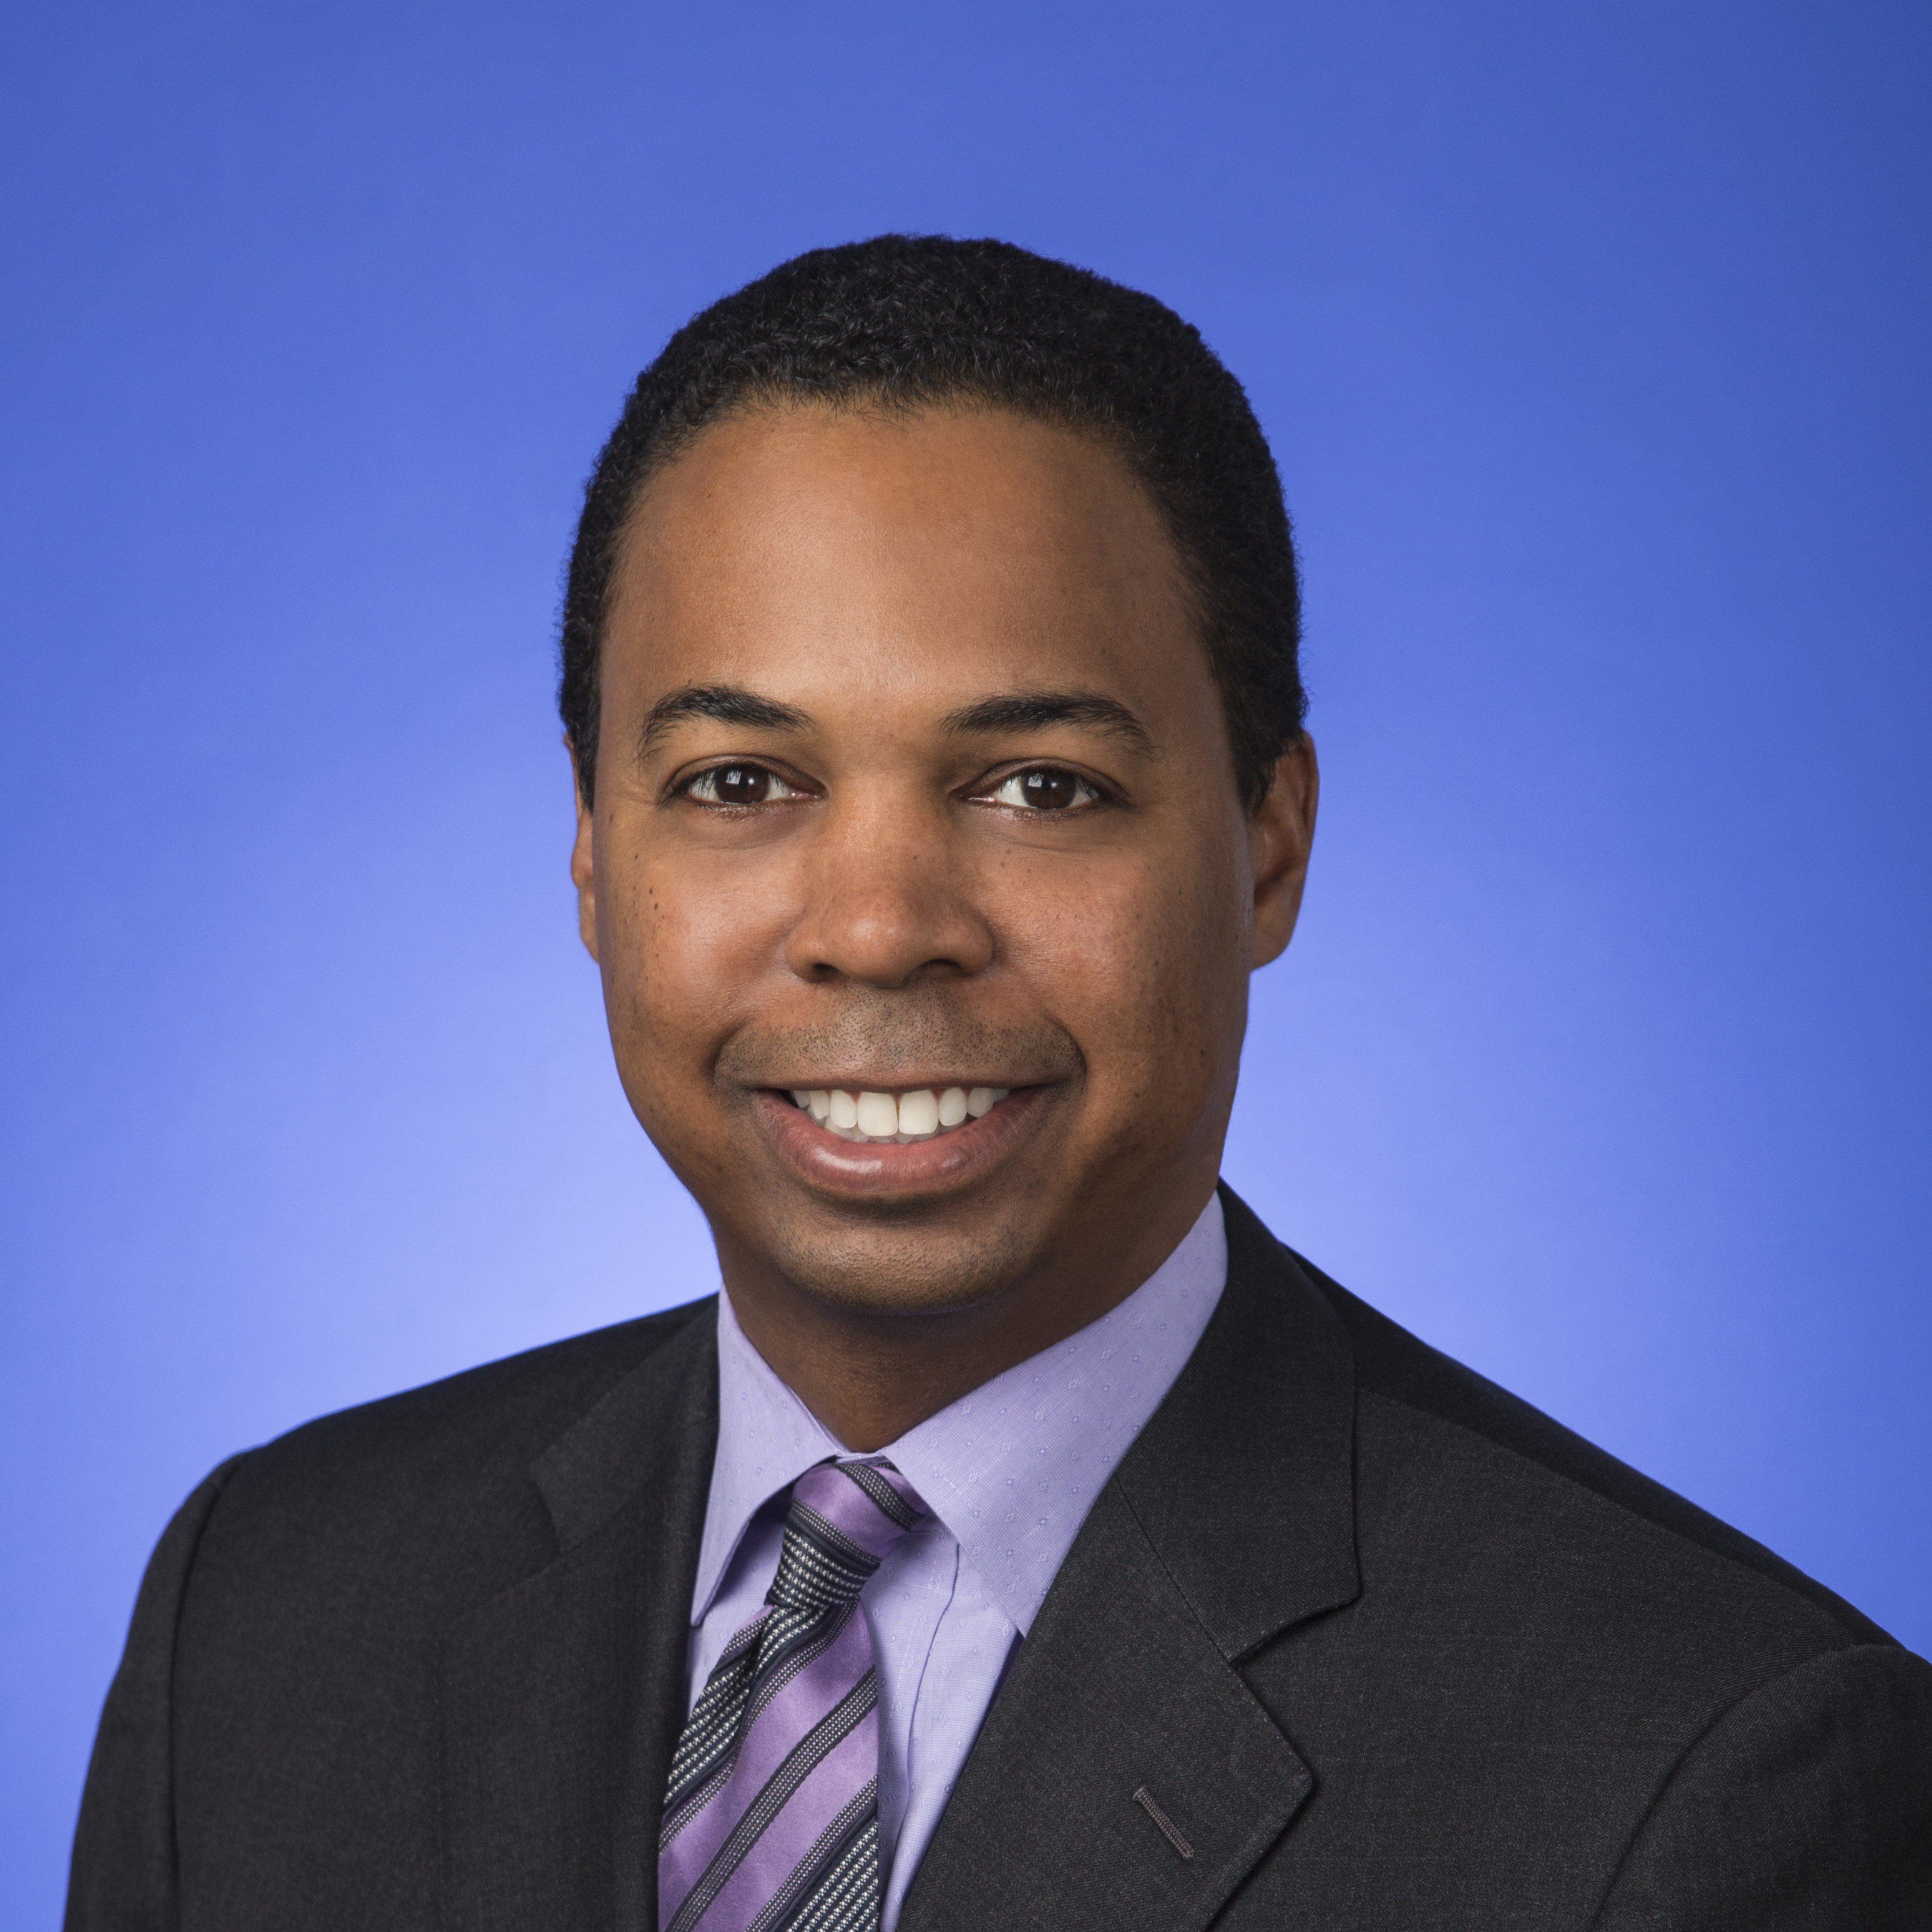 Former Acting General Counsel for U.S. Department of Housing and Urban Development Damon Y. Smith Joins Jenner & Block